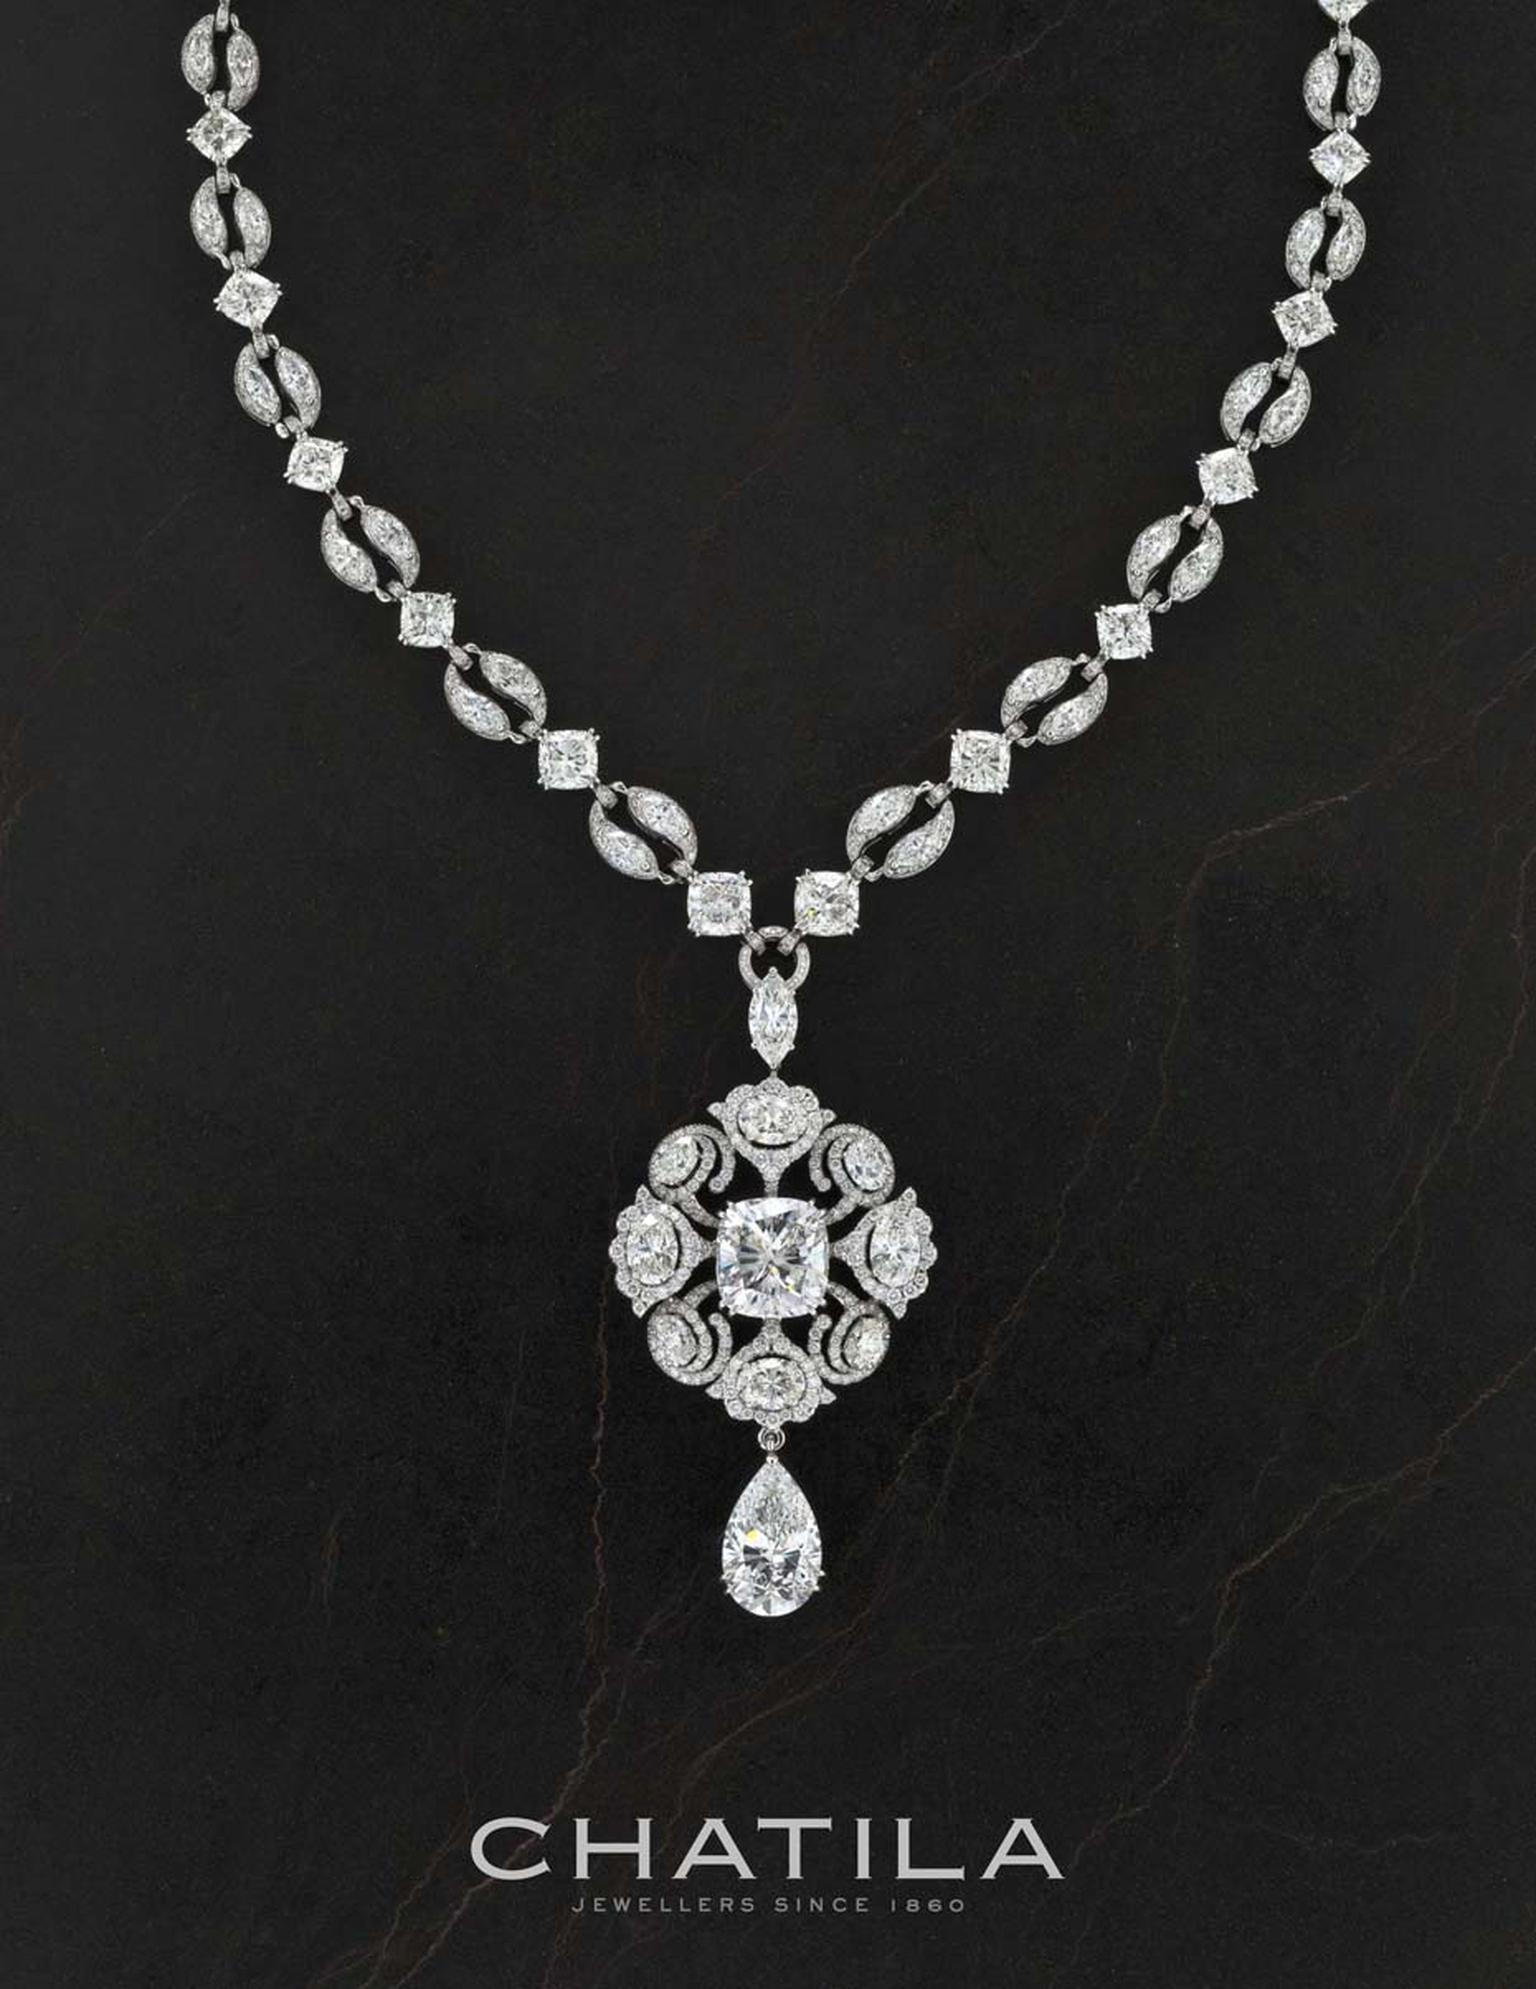 Chatila will also be showing this fancy shape diamond necklace with a 10.04ct cushion cut centre diamond.